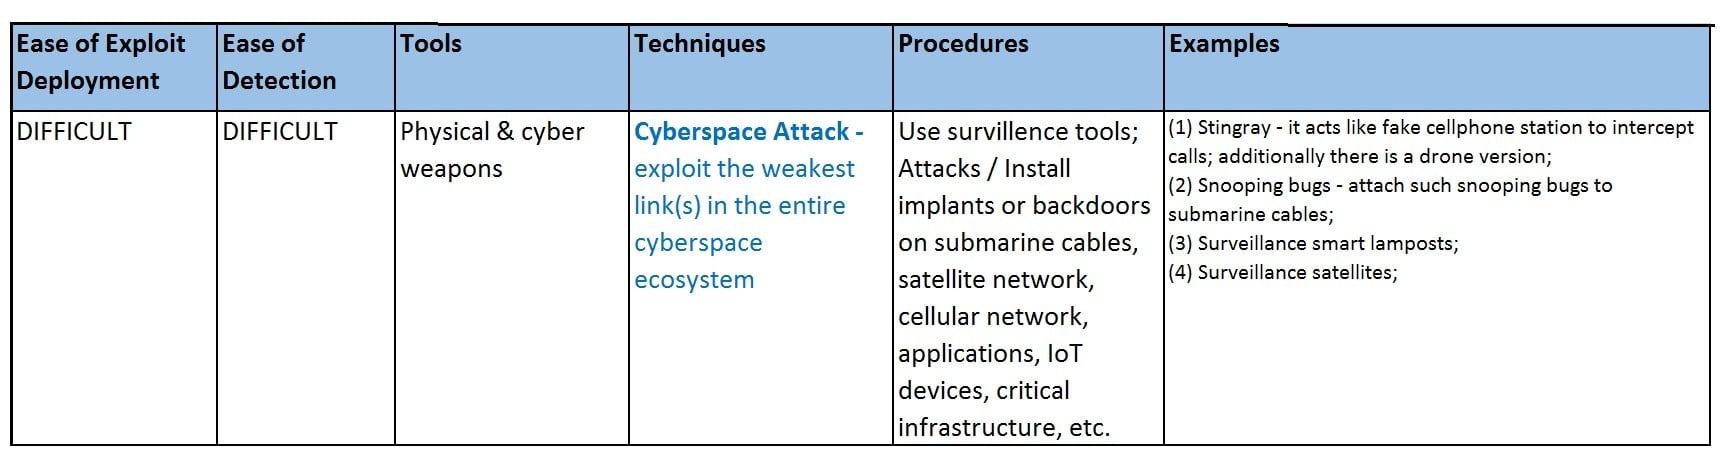 Cyberspace Attack - Exploit the weakest link in the entire cyberspace ecosystem